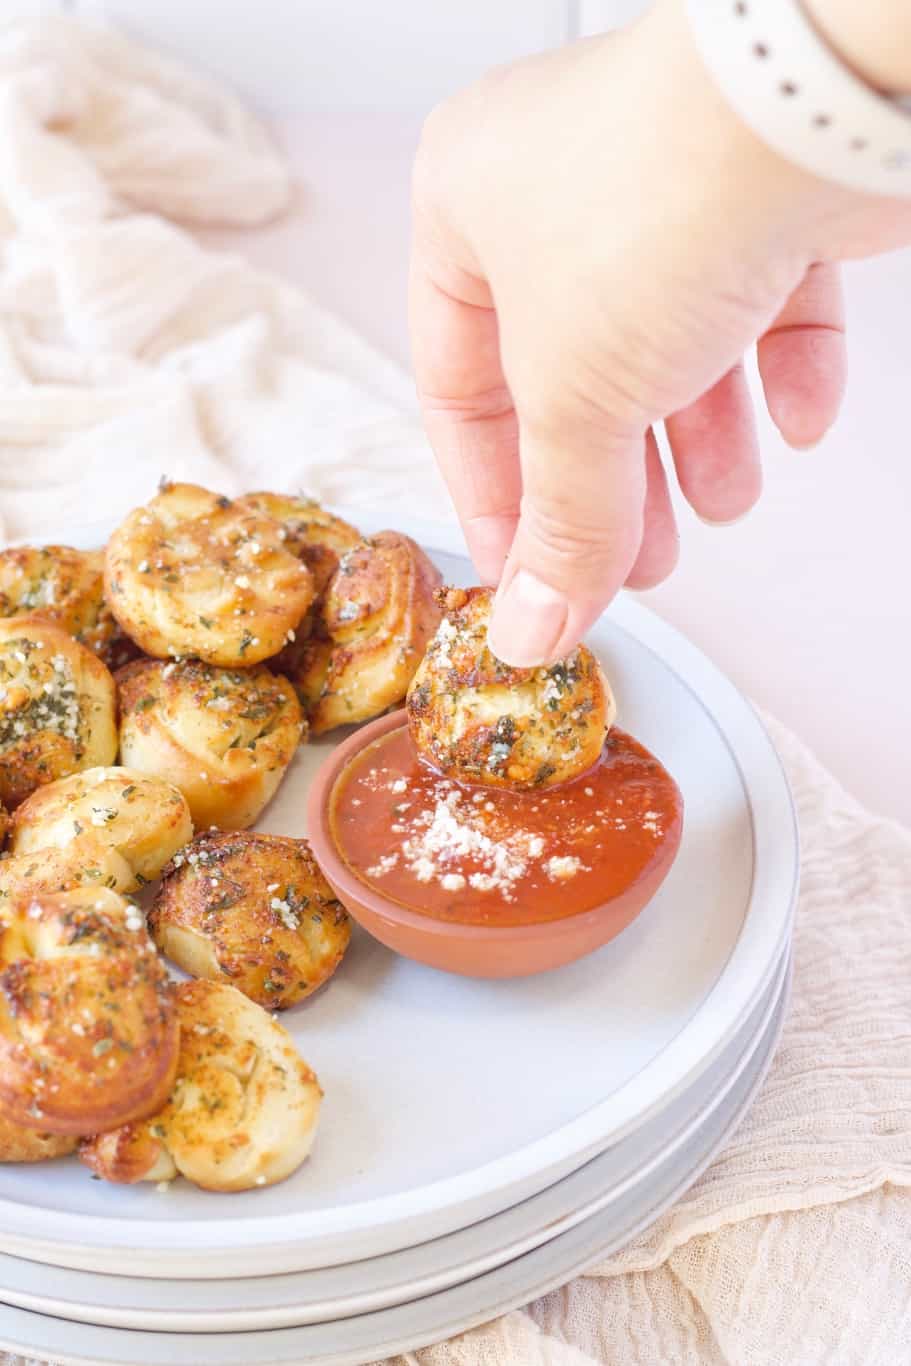 soft and pillowy parmesan bread bites dipped in marinara sauce